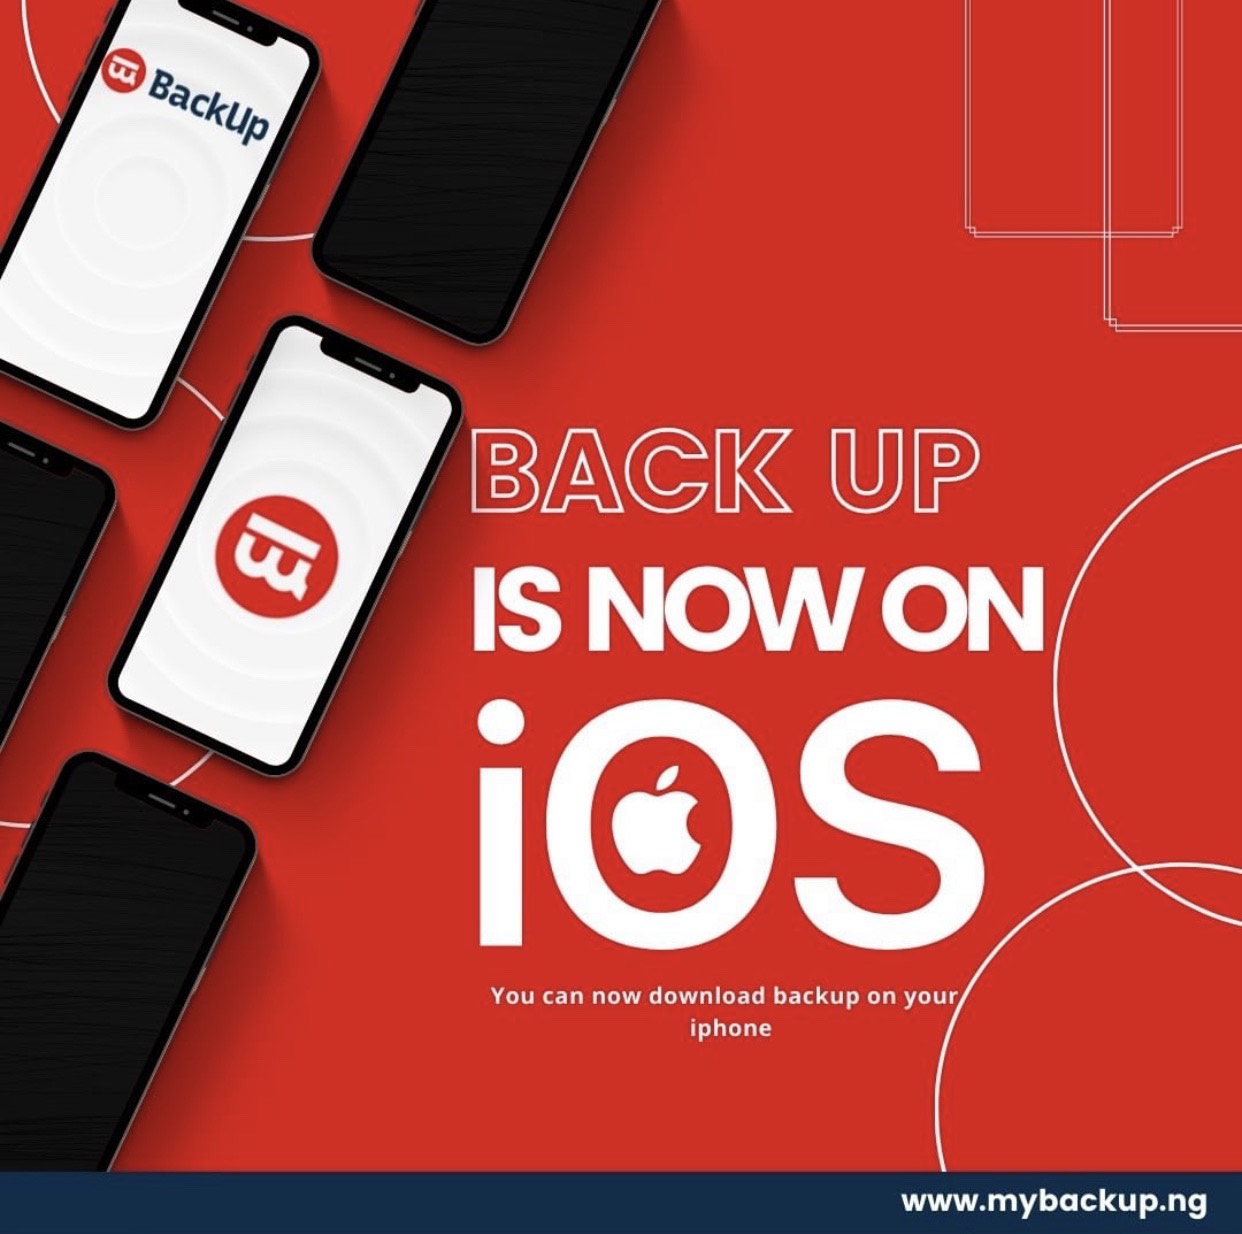 CWCDAfrica:We promised and we delivered- Backup is live on the App store.